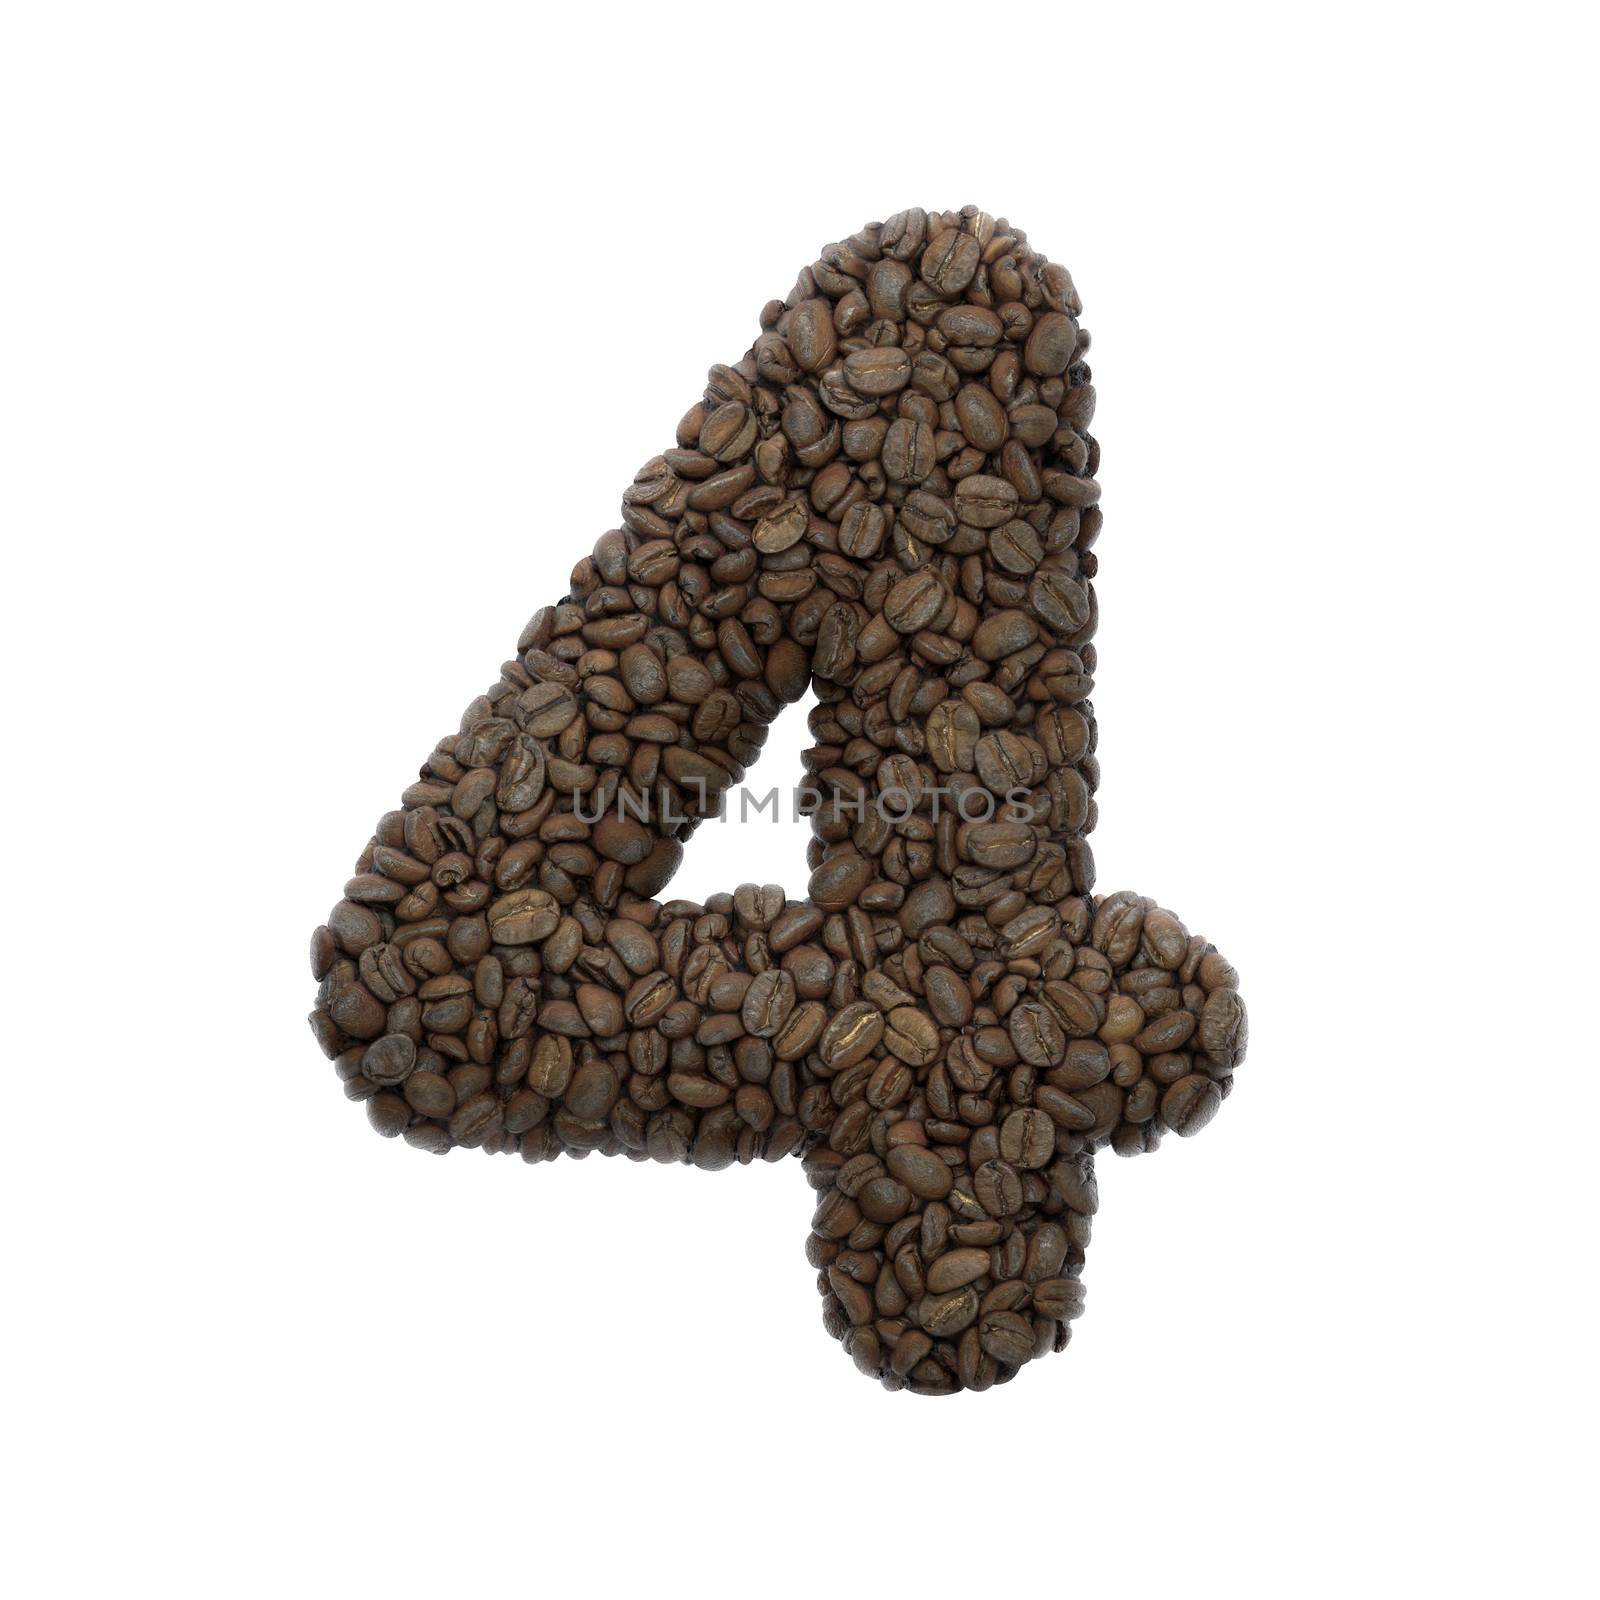 Coffee number 4 - 3d roasted beans digit isolated on white background. This alphabet is perfect for creative illustrations related but not limited to Coffee, energy, insomnia...